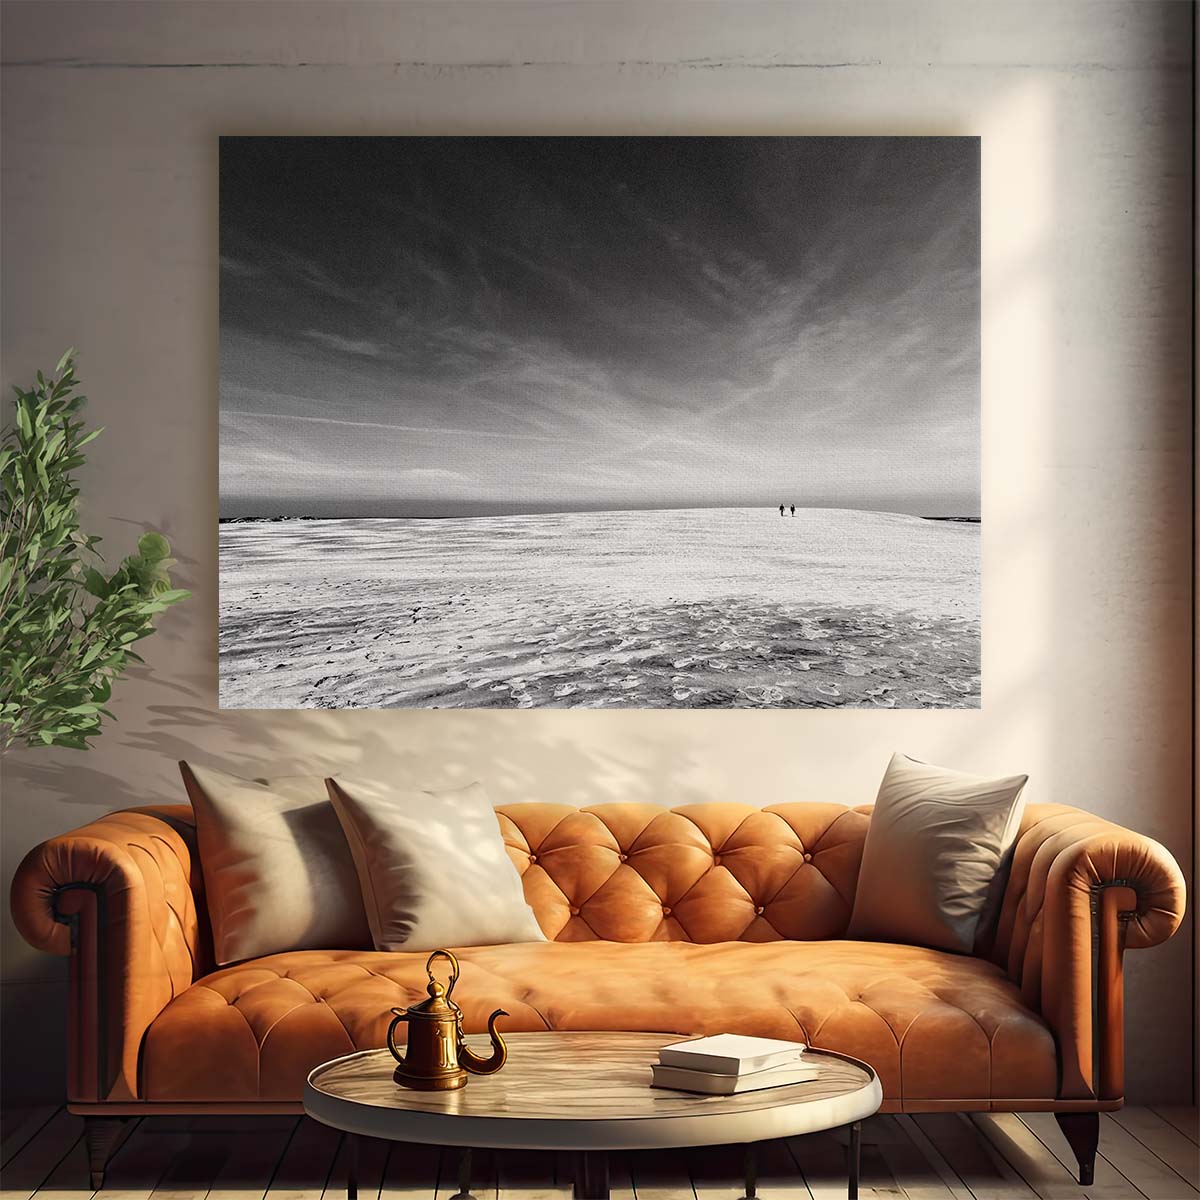 Solitary Couple in Snowy Landscape Monochrome Wall Art by Luxuriance Designs. Made in USA.